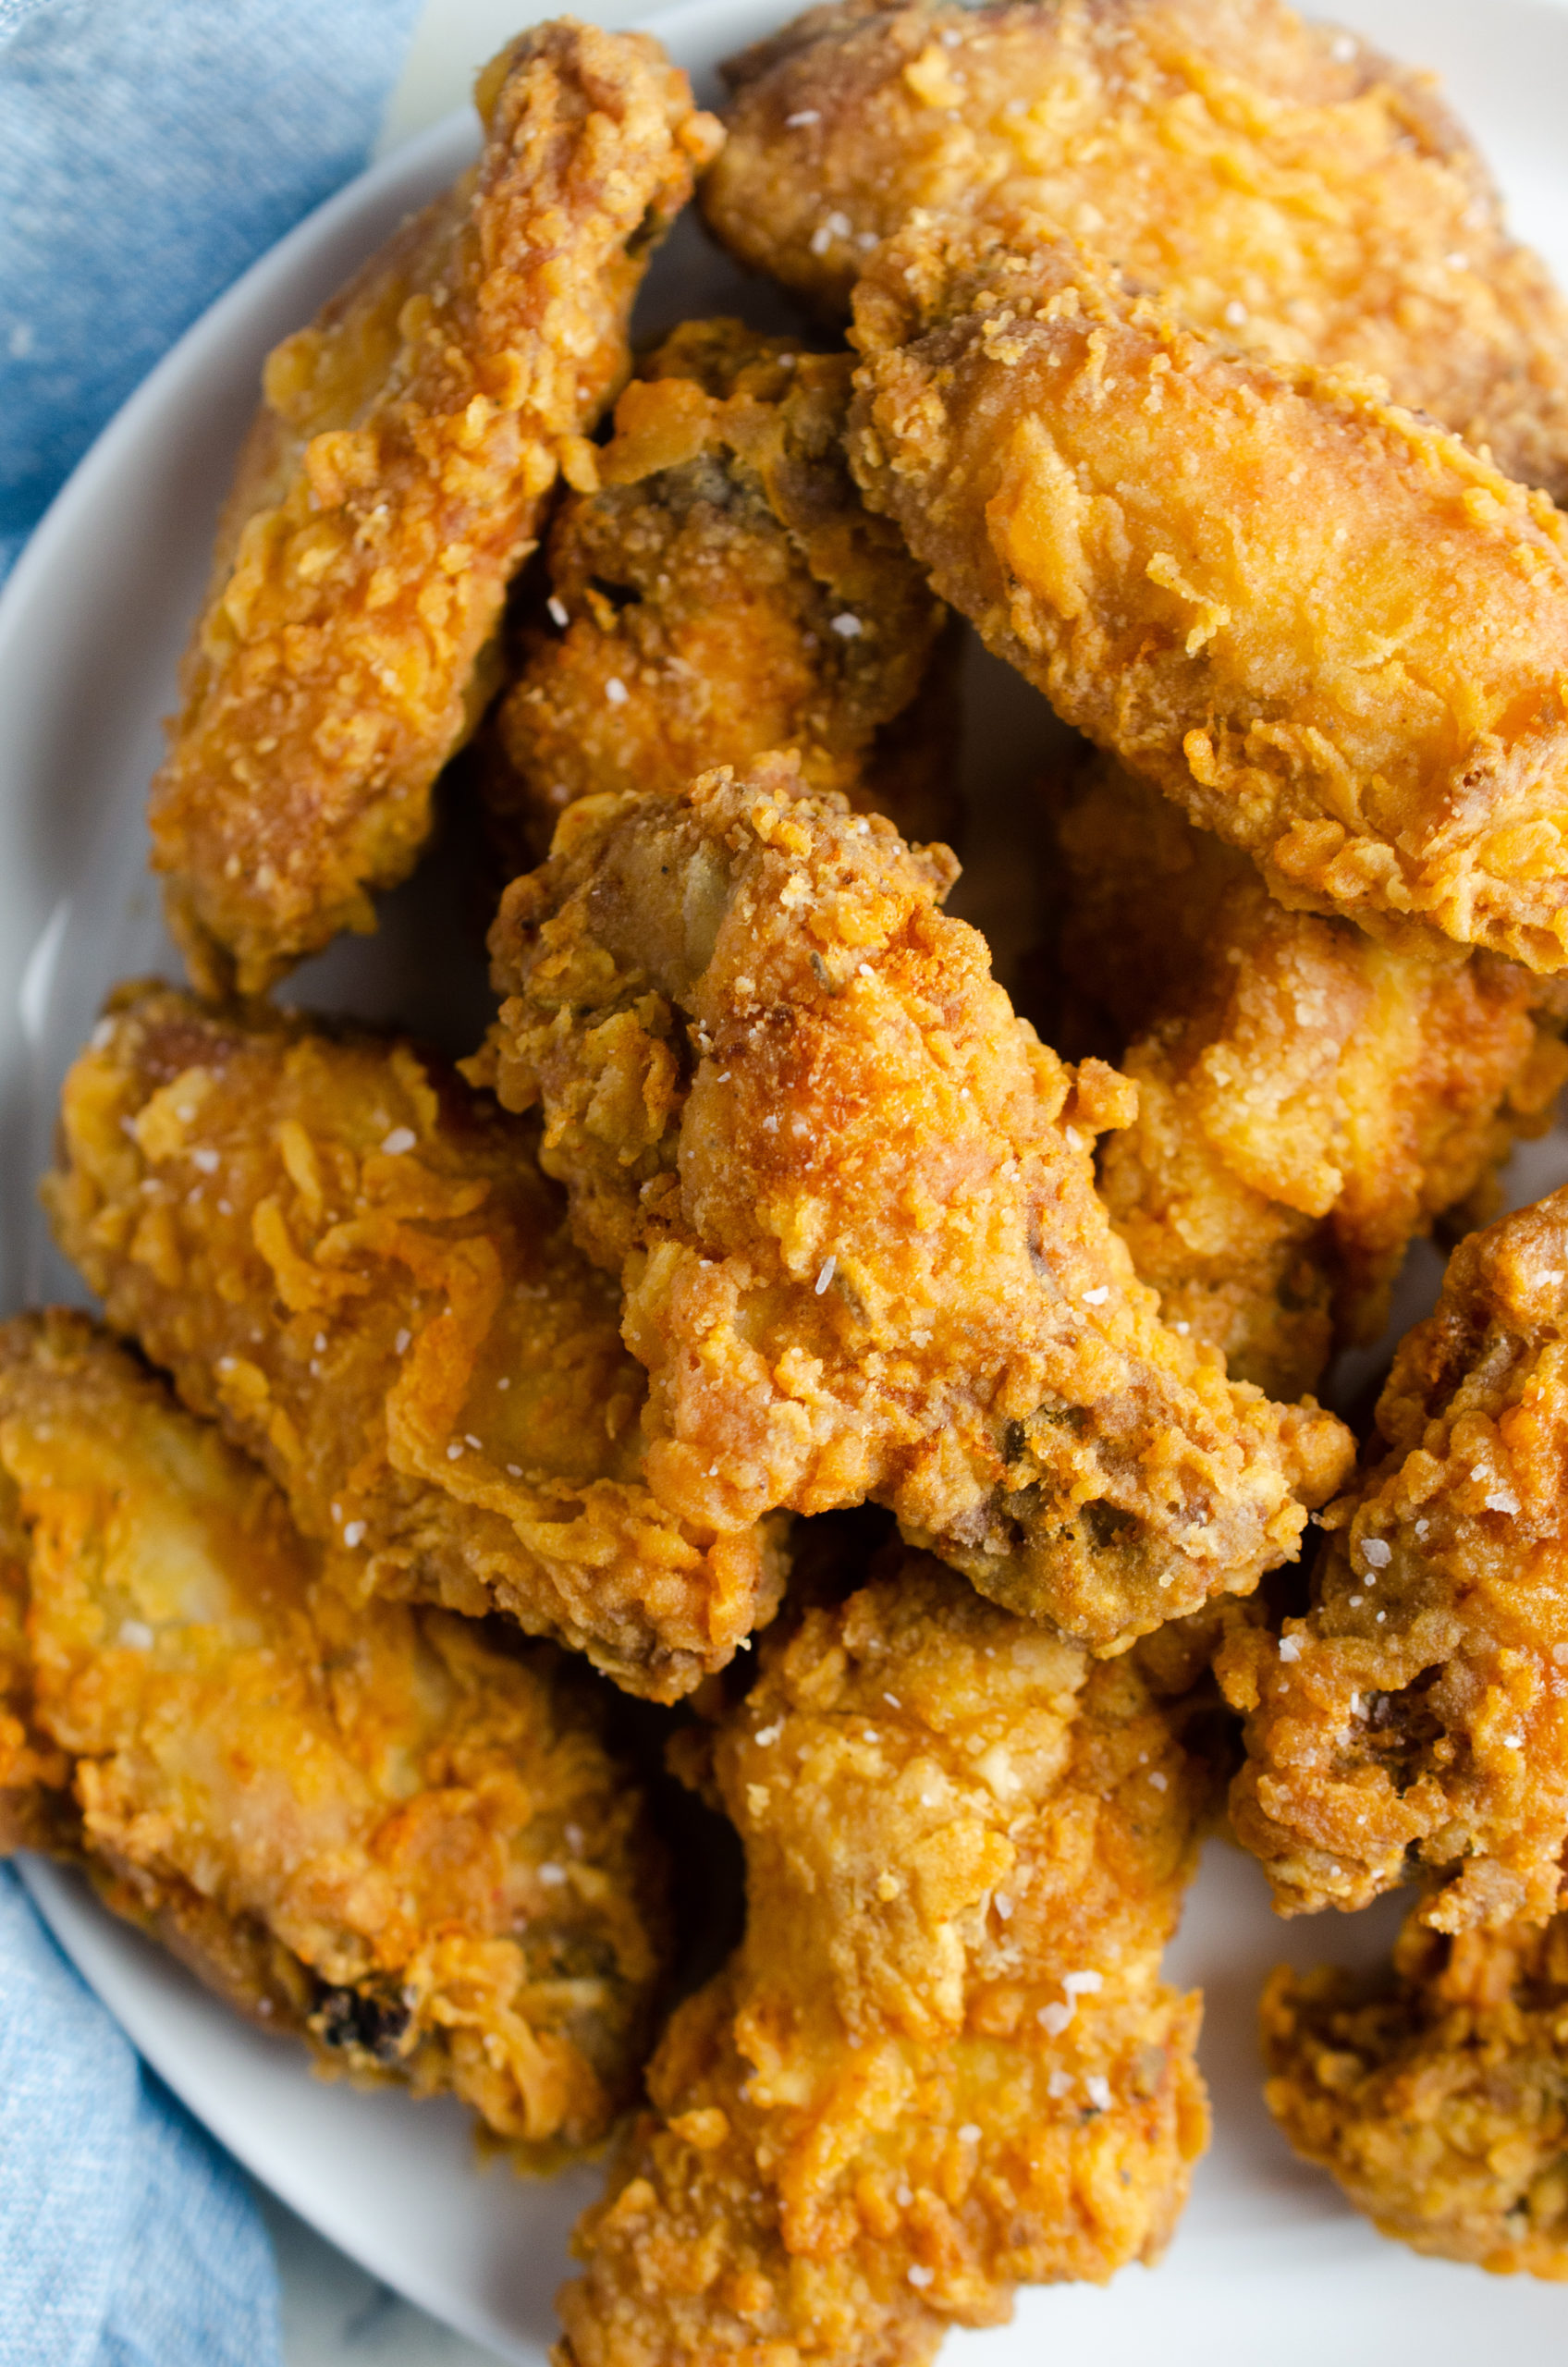 Deep Fried Chicken Wings Recipe | Life's Ambrosia